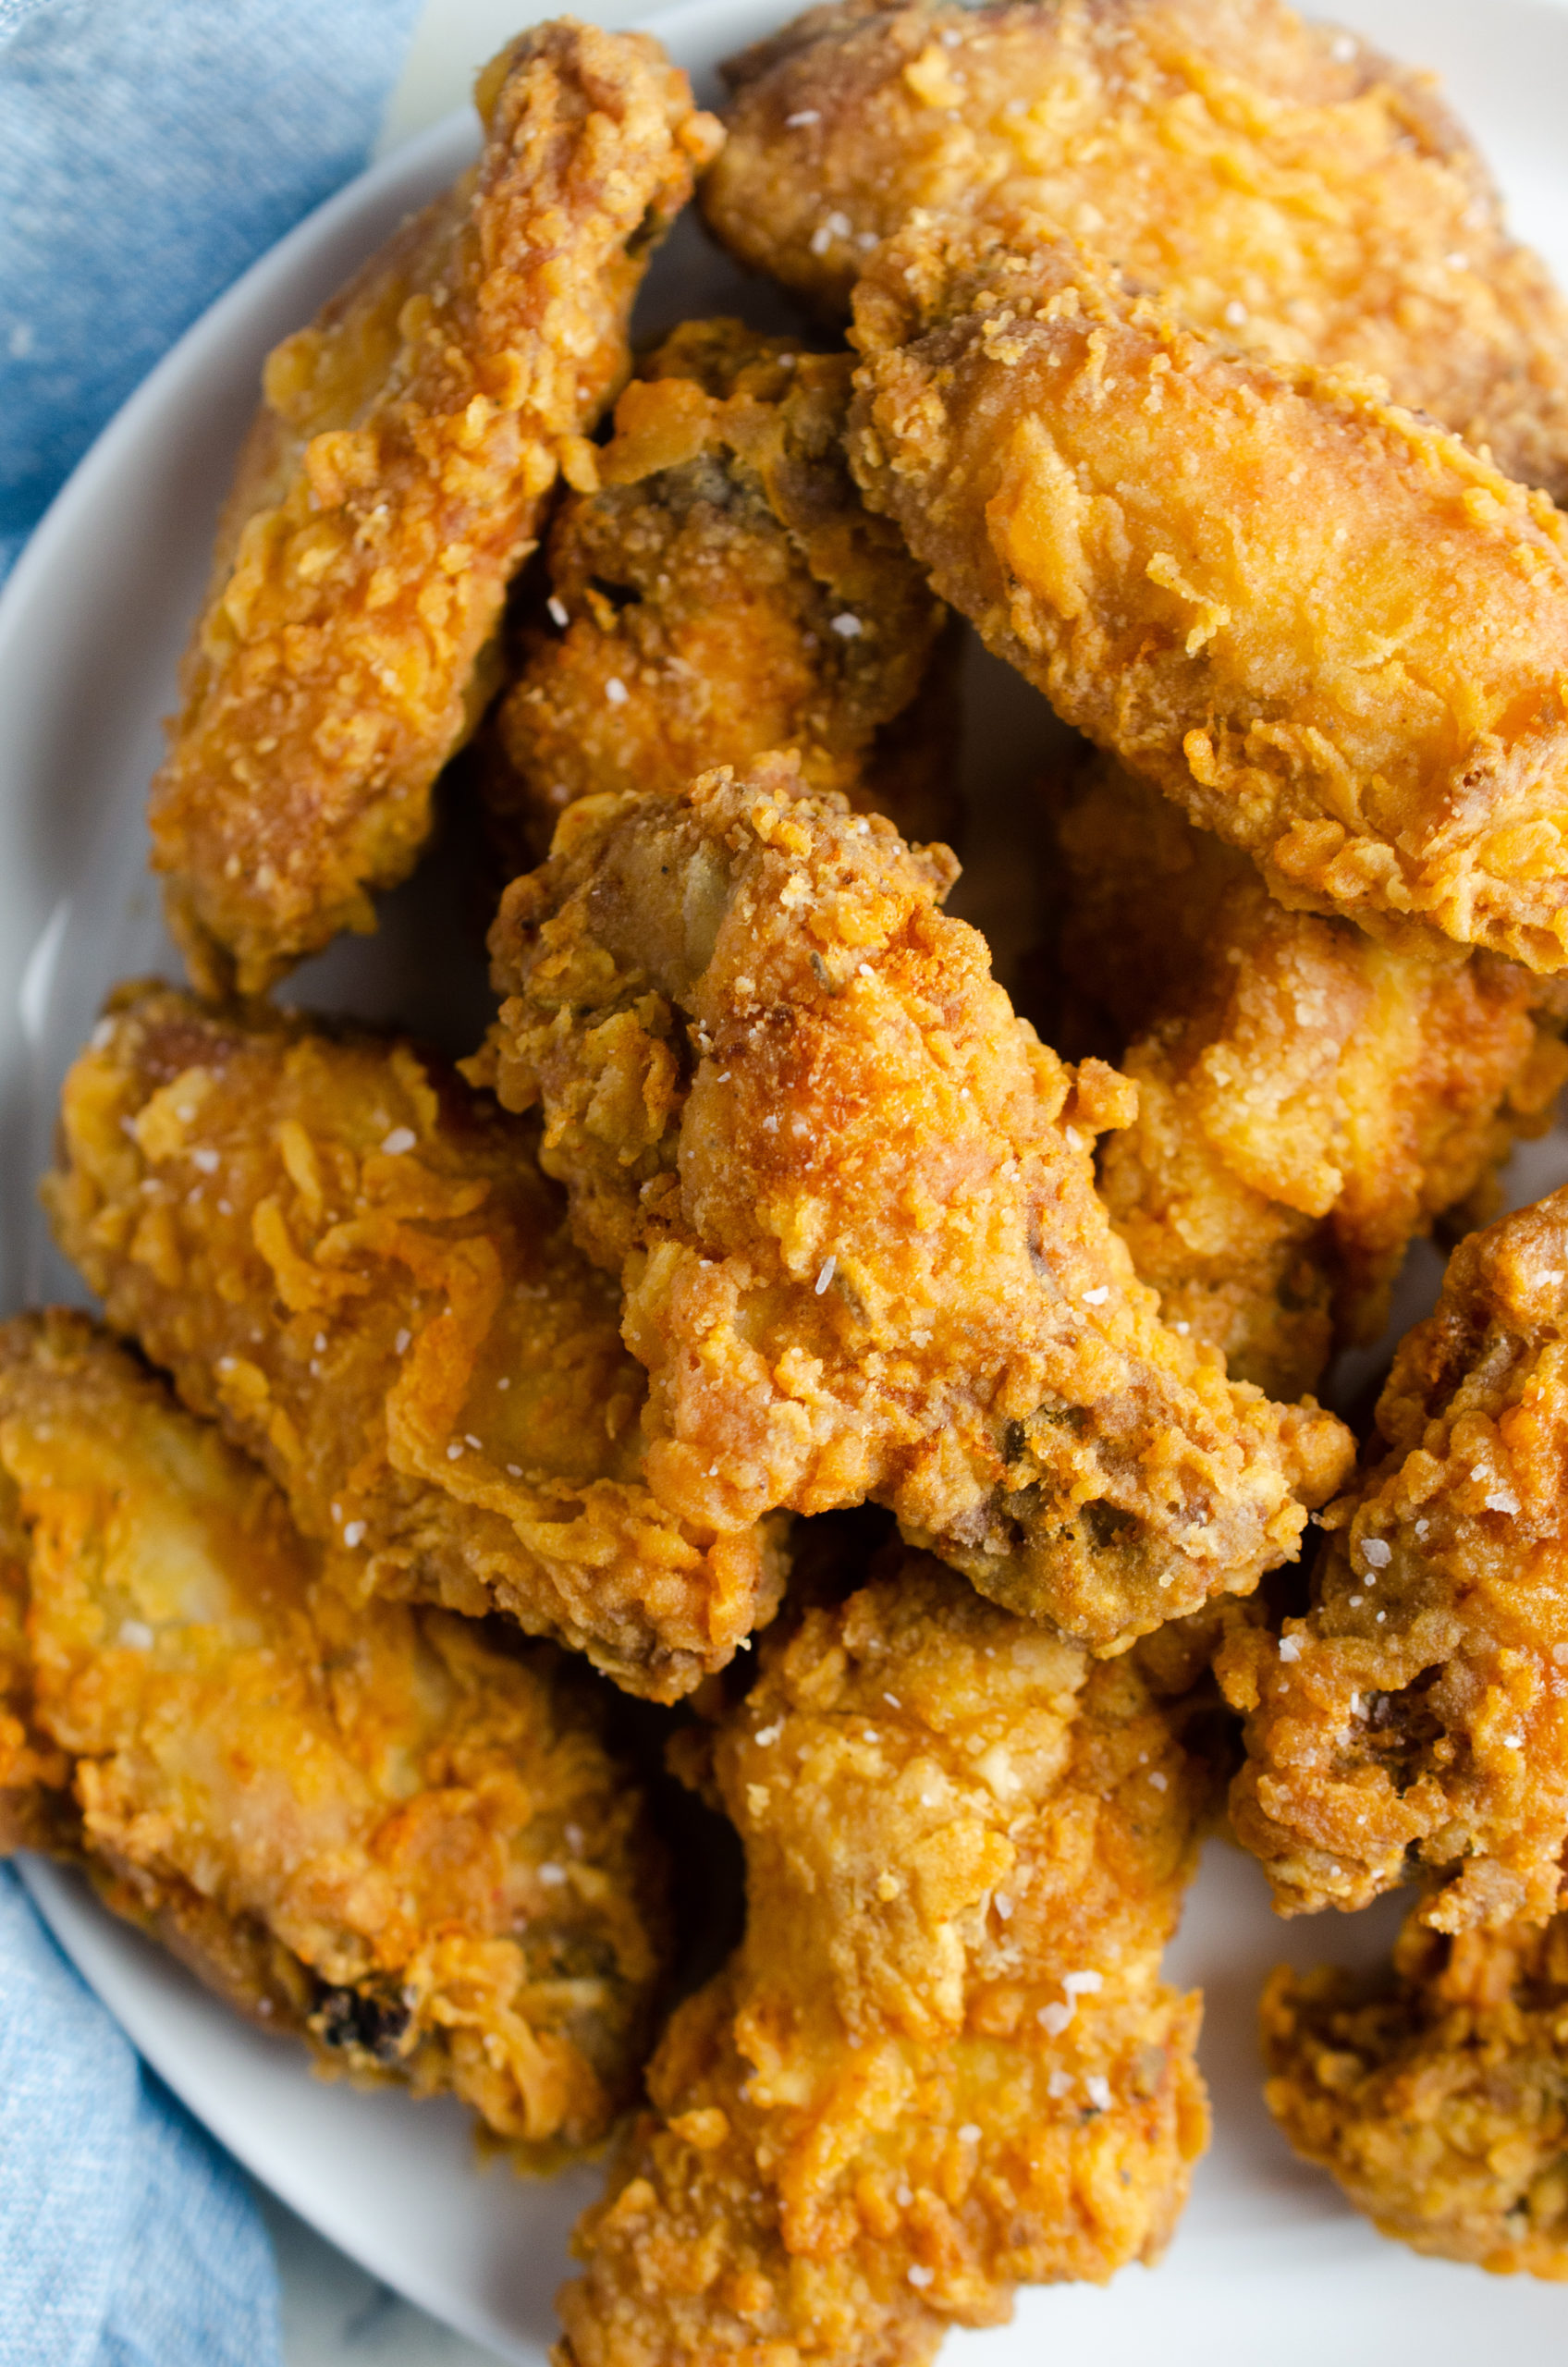 Deep Fried Chicken Wings Recipe | Life's Ambrosia